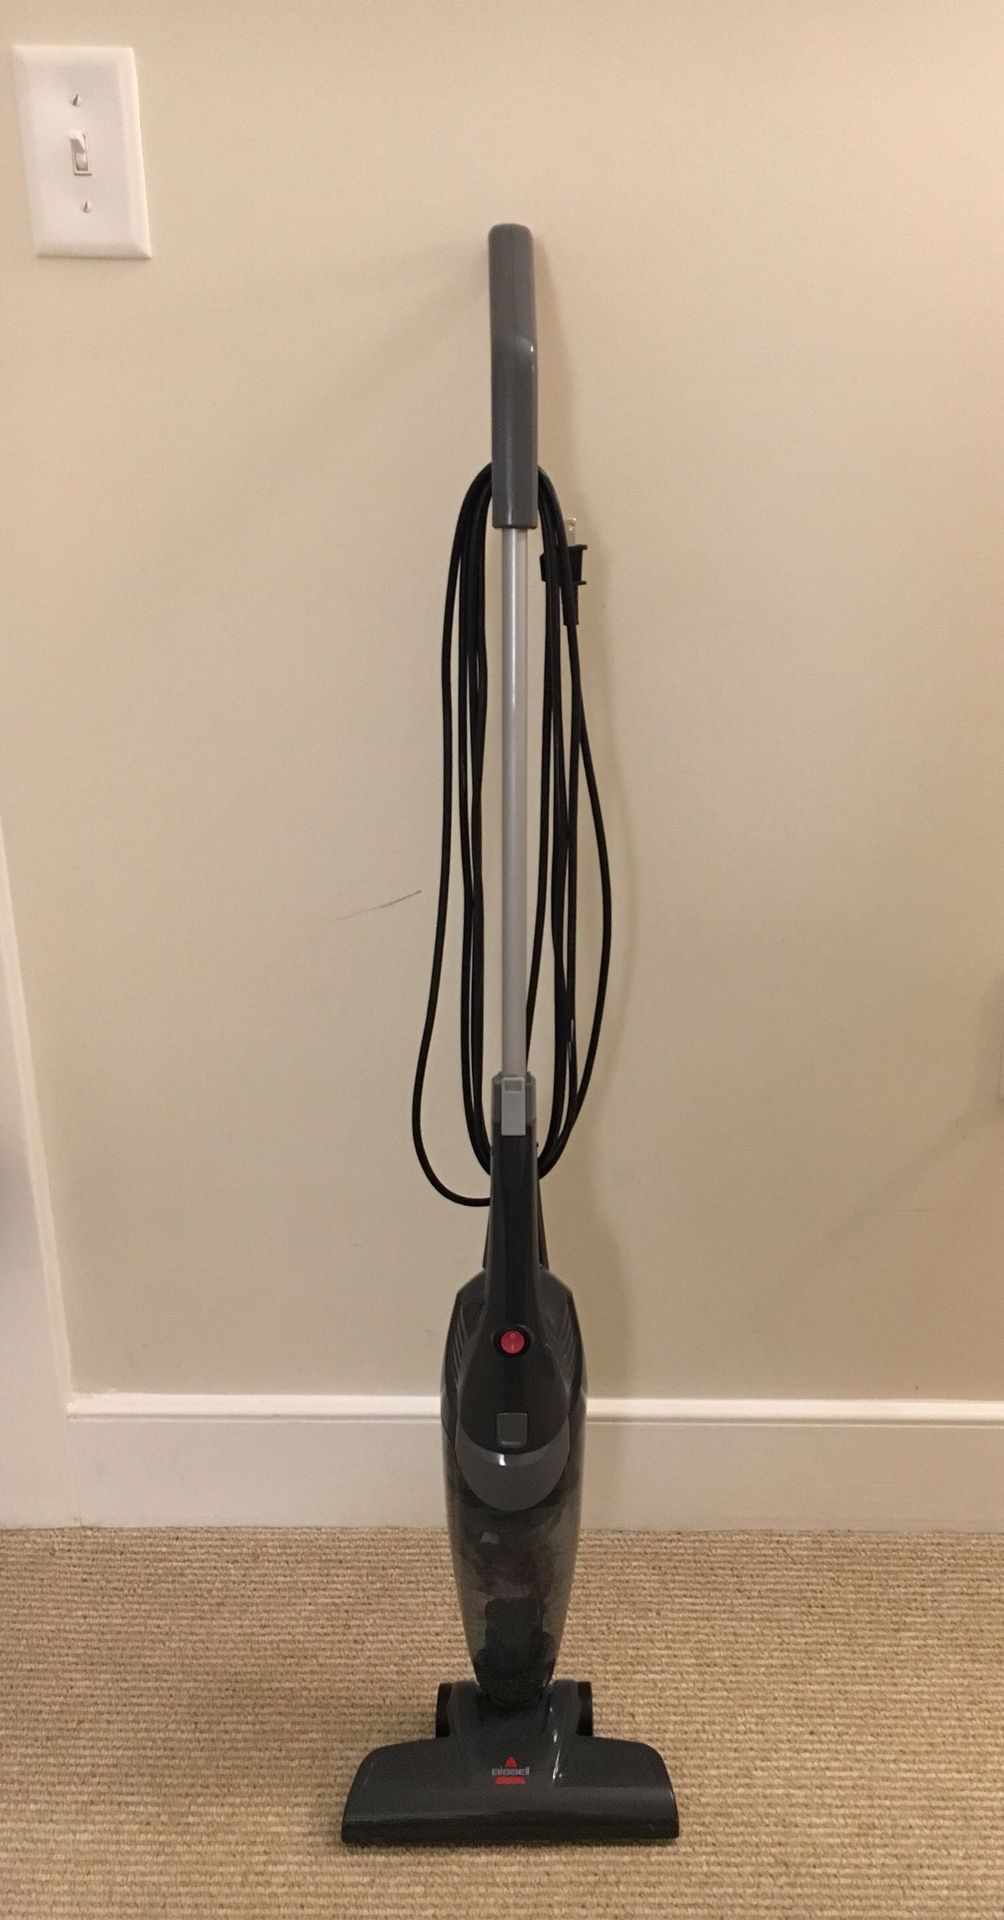 Vacuum hand held upright (Bissell)